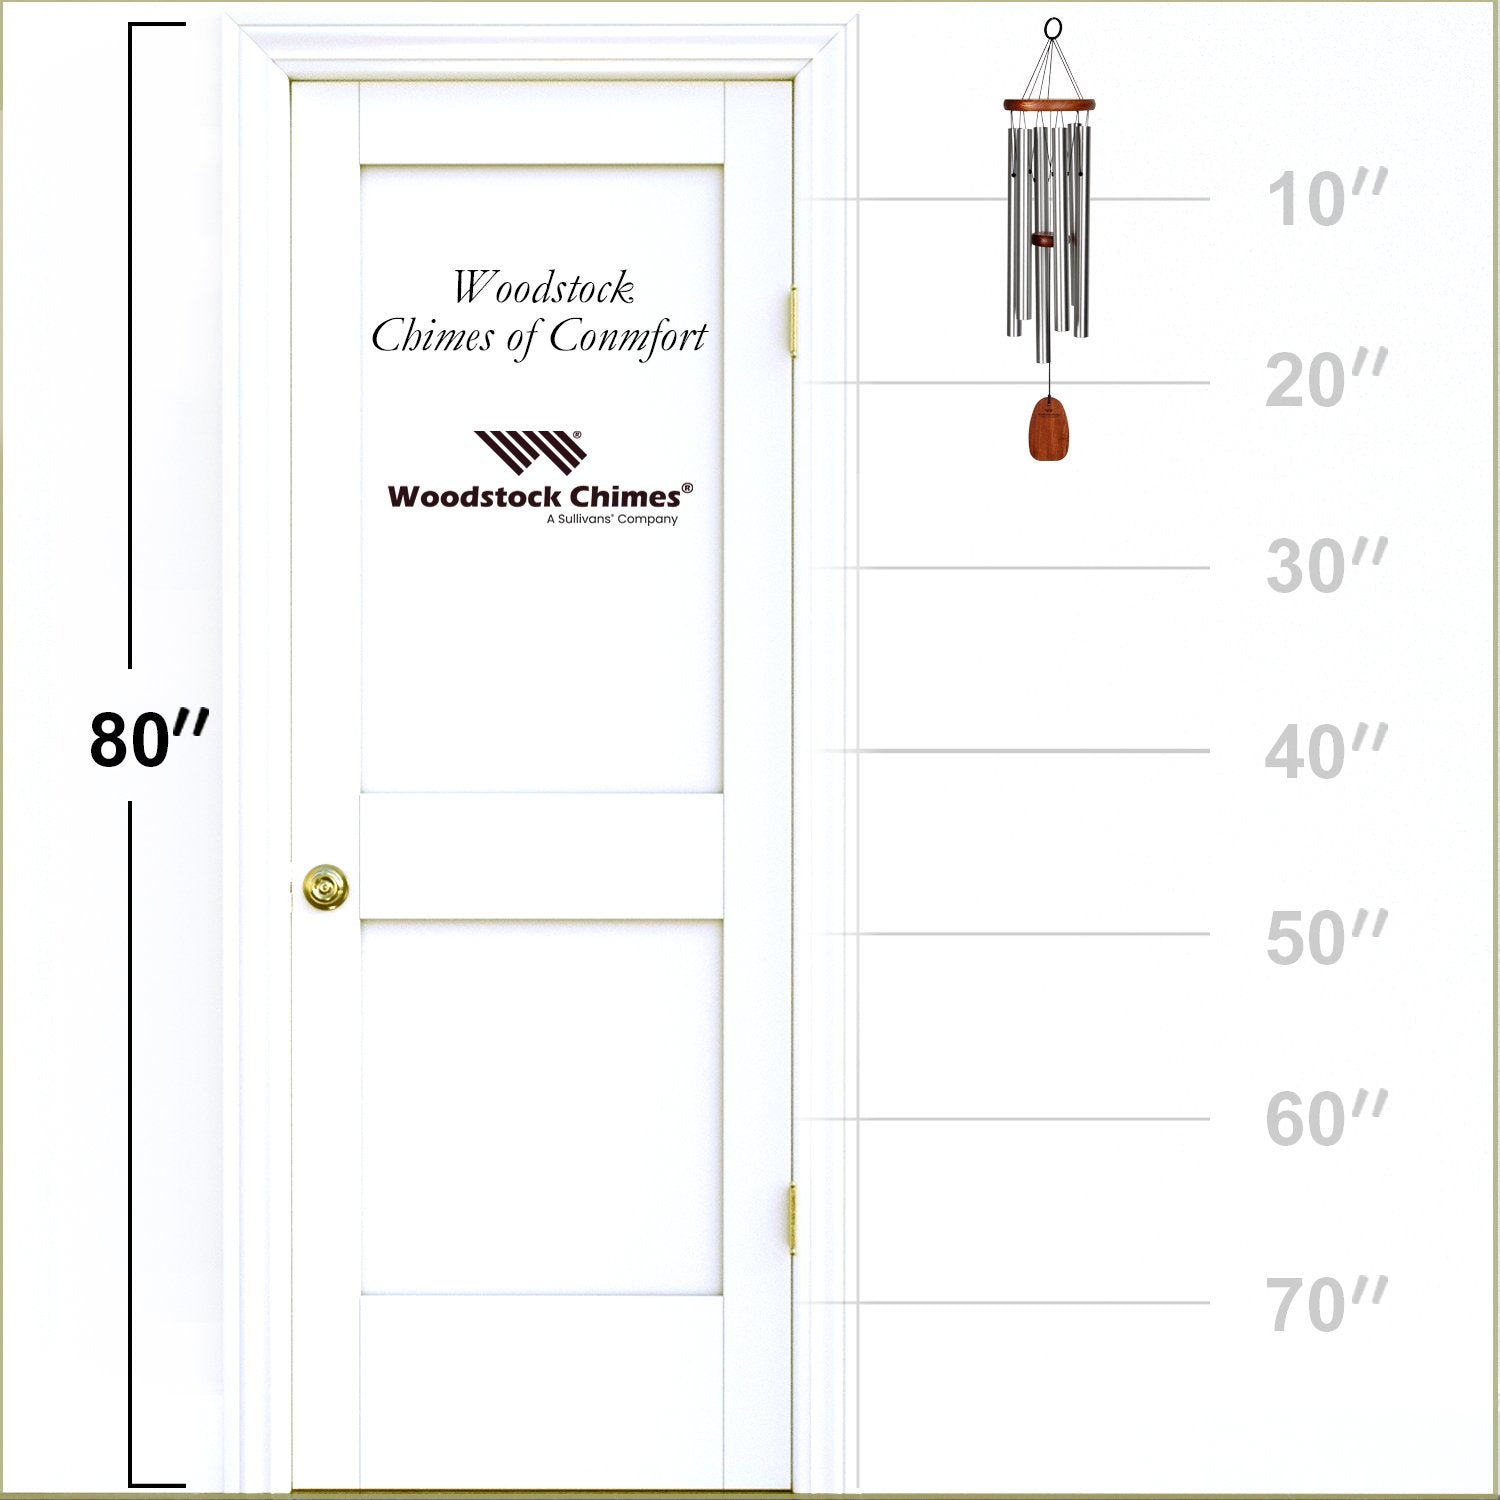 Woodstock Chimes of Comfort™ proportion image